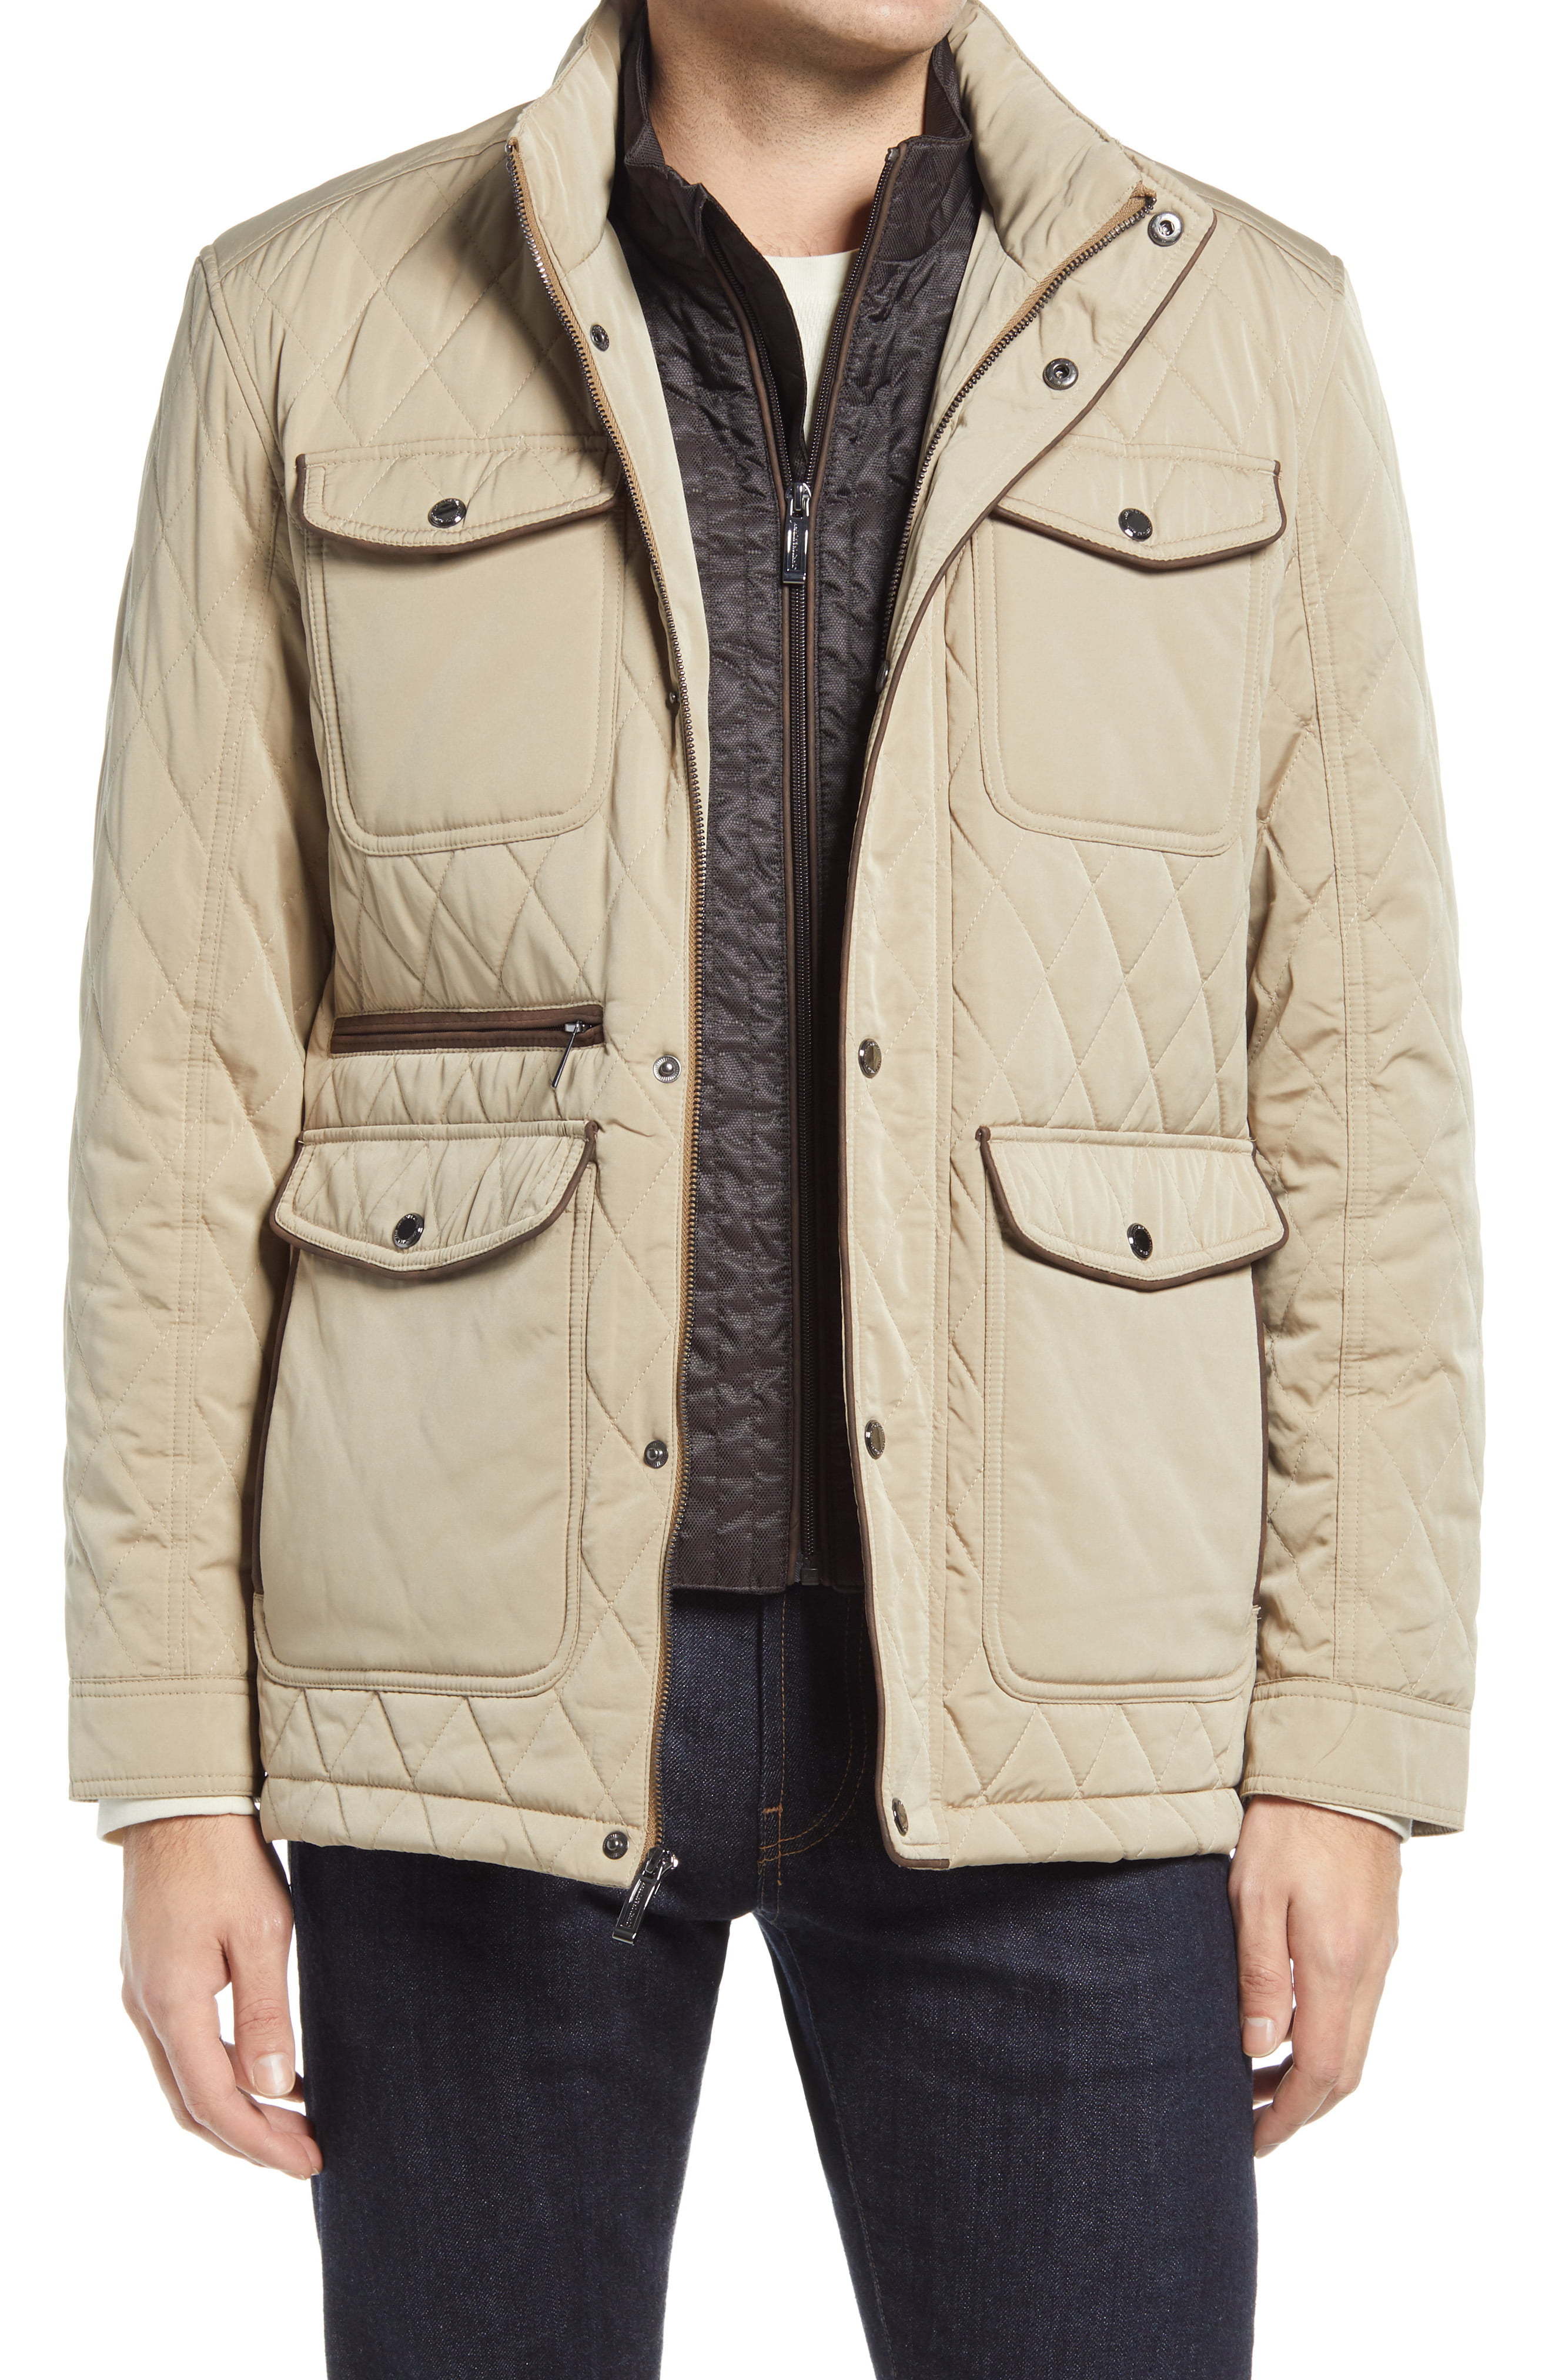 Johnston & Murphy Water Resistant Quilted Jacket, $246 | Nordstrom ...